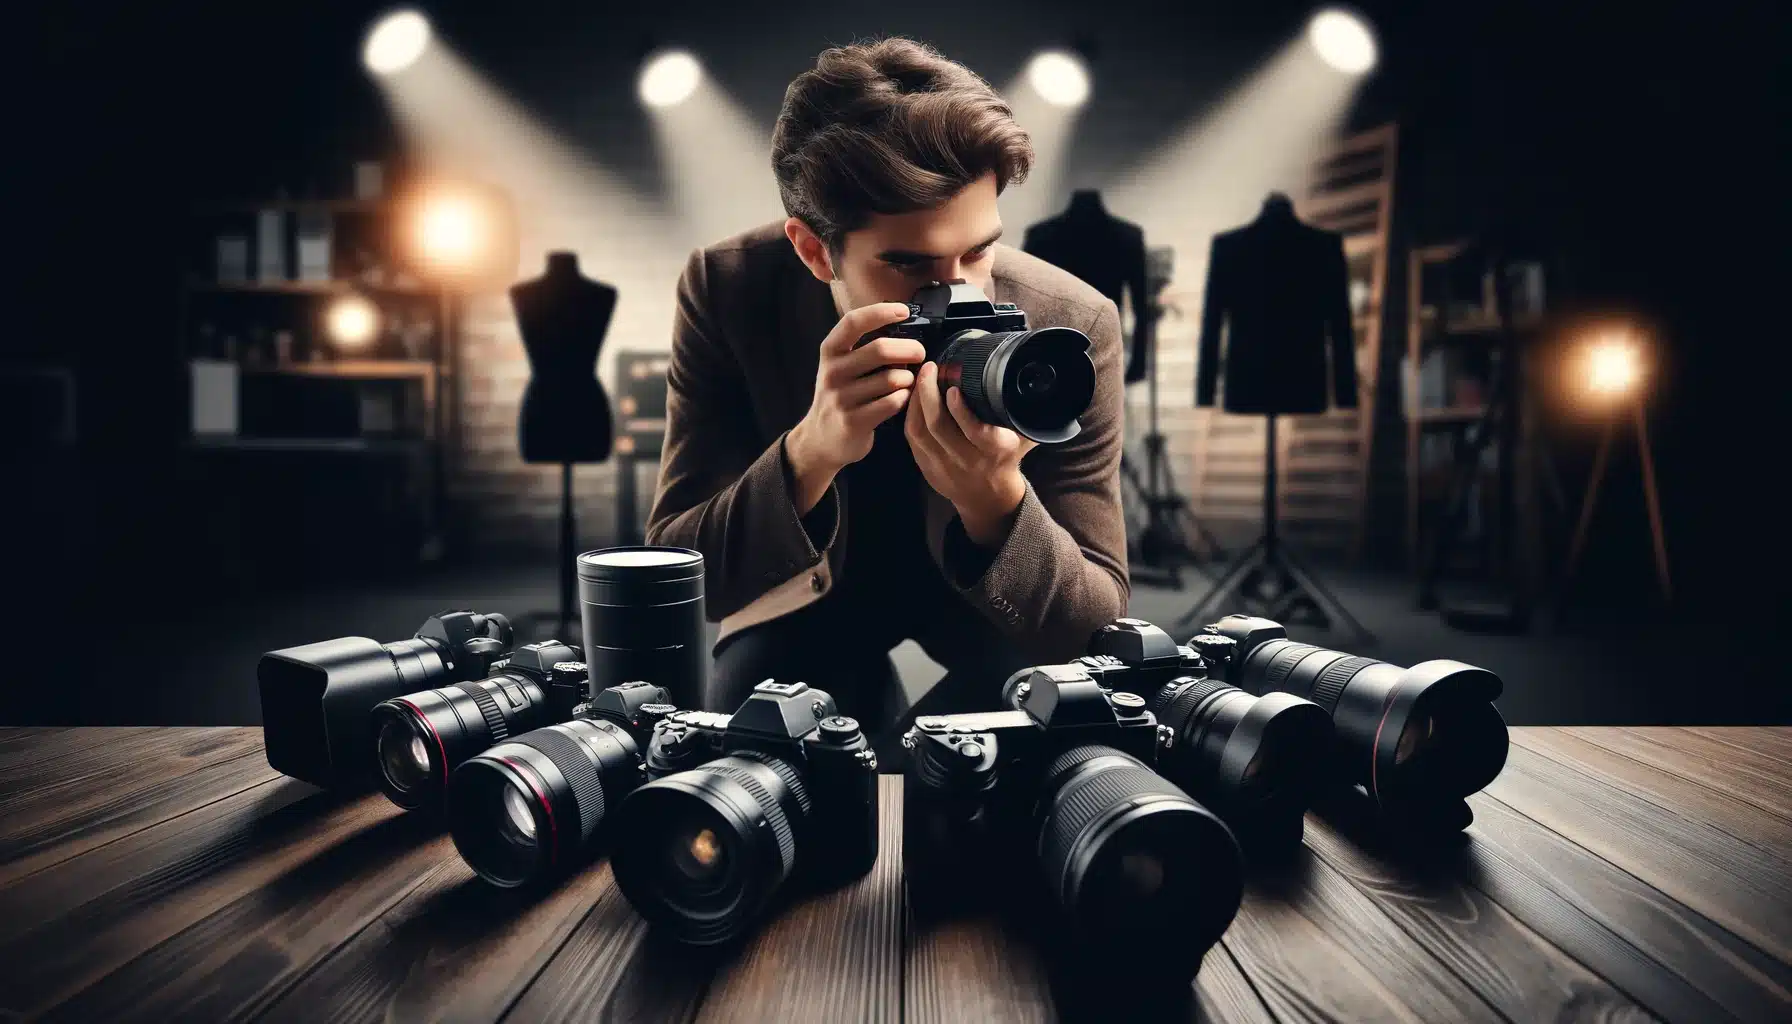 Photographer in studio taking a photo, surrounded by various professional cameras and lenses, showcasing a comparison of equipment.